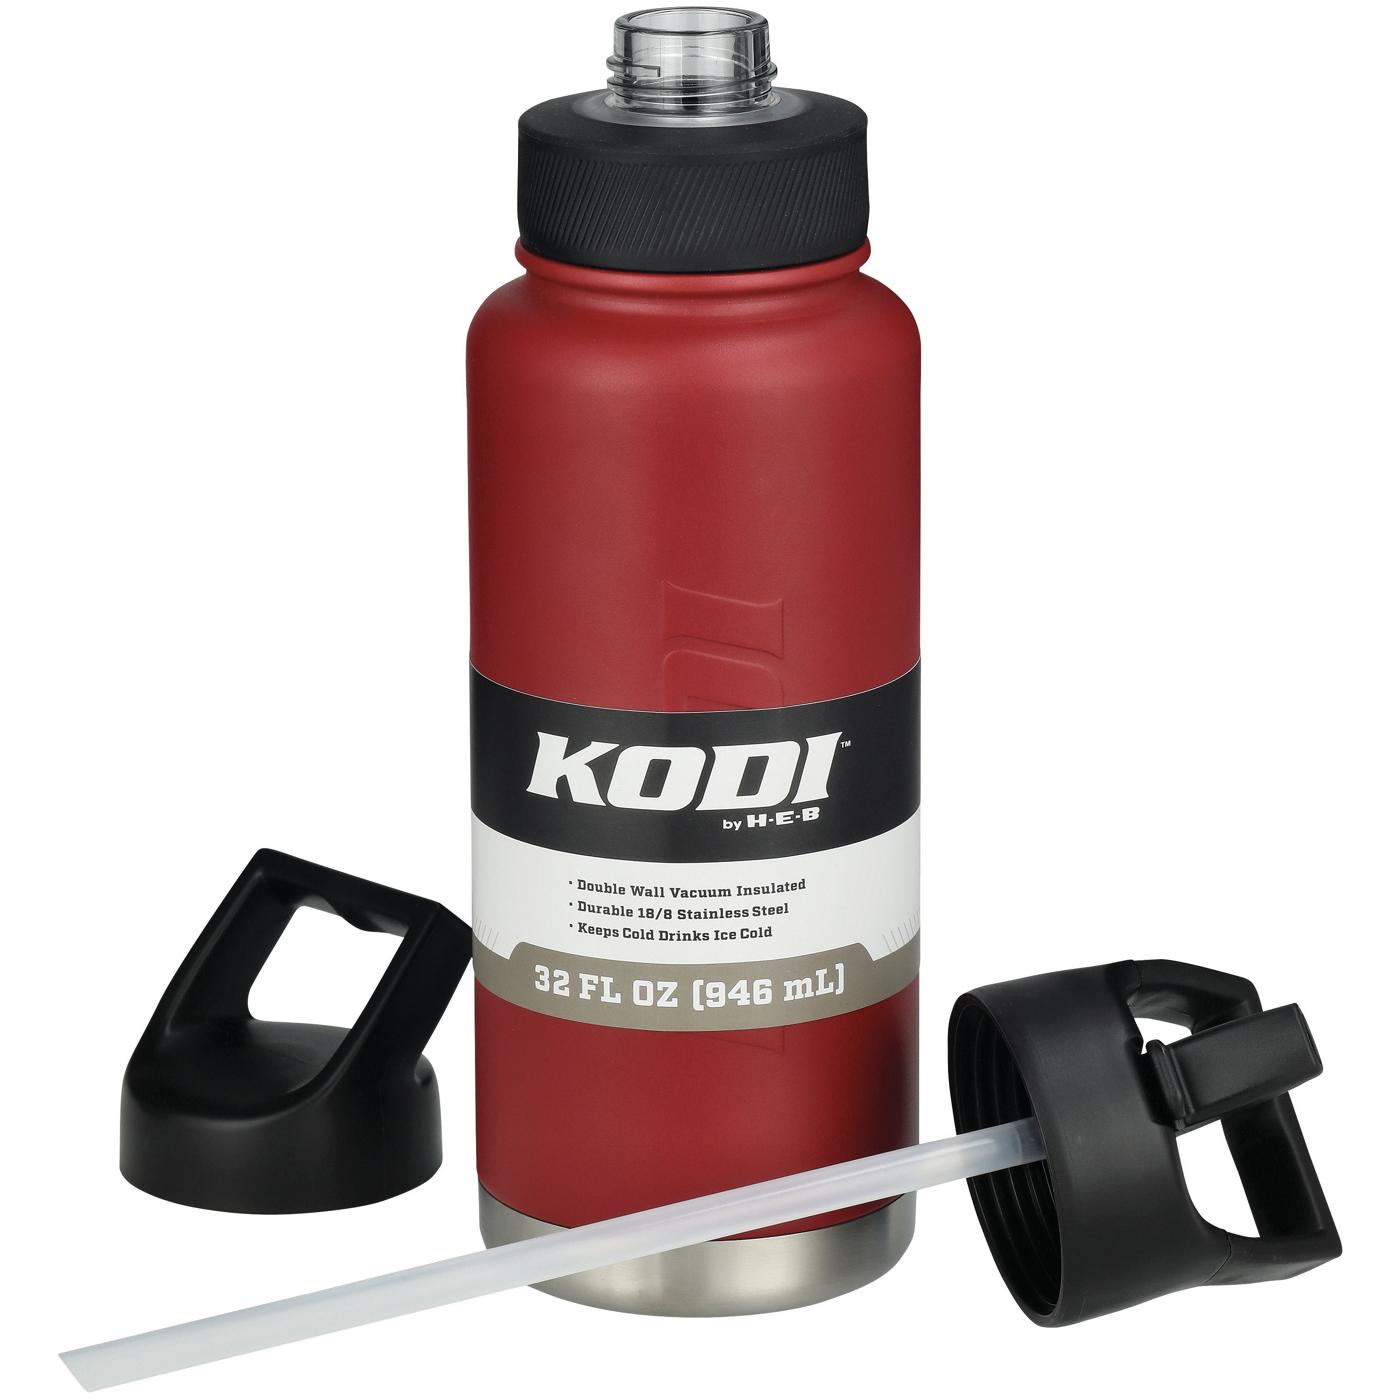 KODI by H-E-B Stainless Steel Water Bottle - Matte Red; image 2 of 4